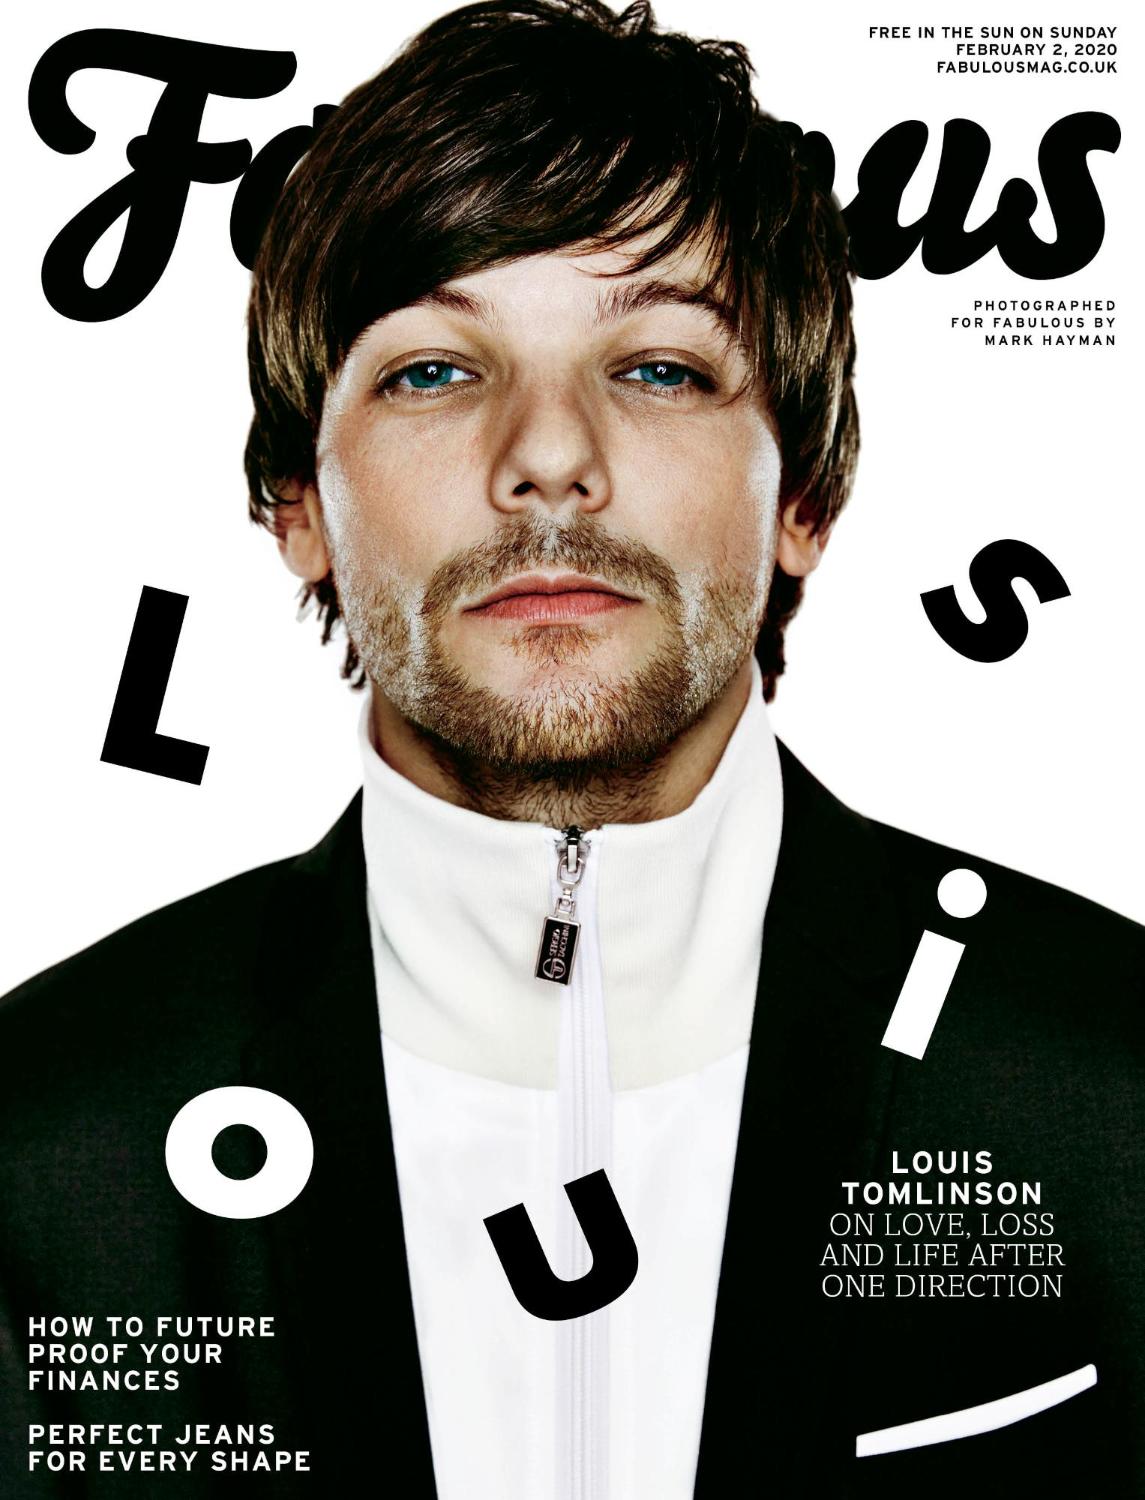 Louis Tomlinson. Follow your dreams. - HAPPY SUNDAY with this amazing  picture of Louis for Fabulous Magazine! :-) <3 Our sweetheart is so proud  of us, of all the support and we're